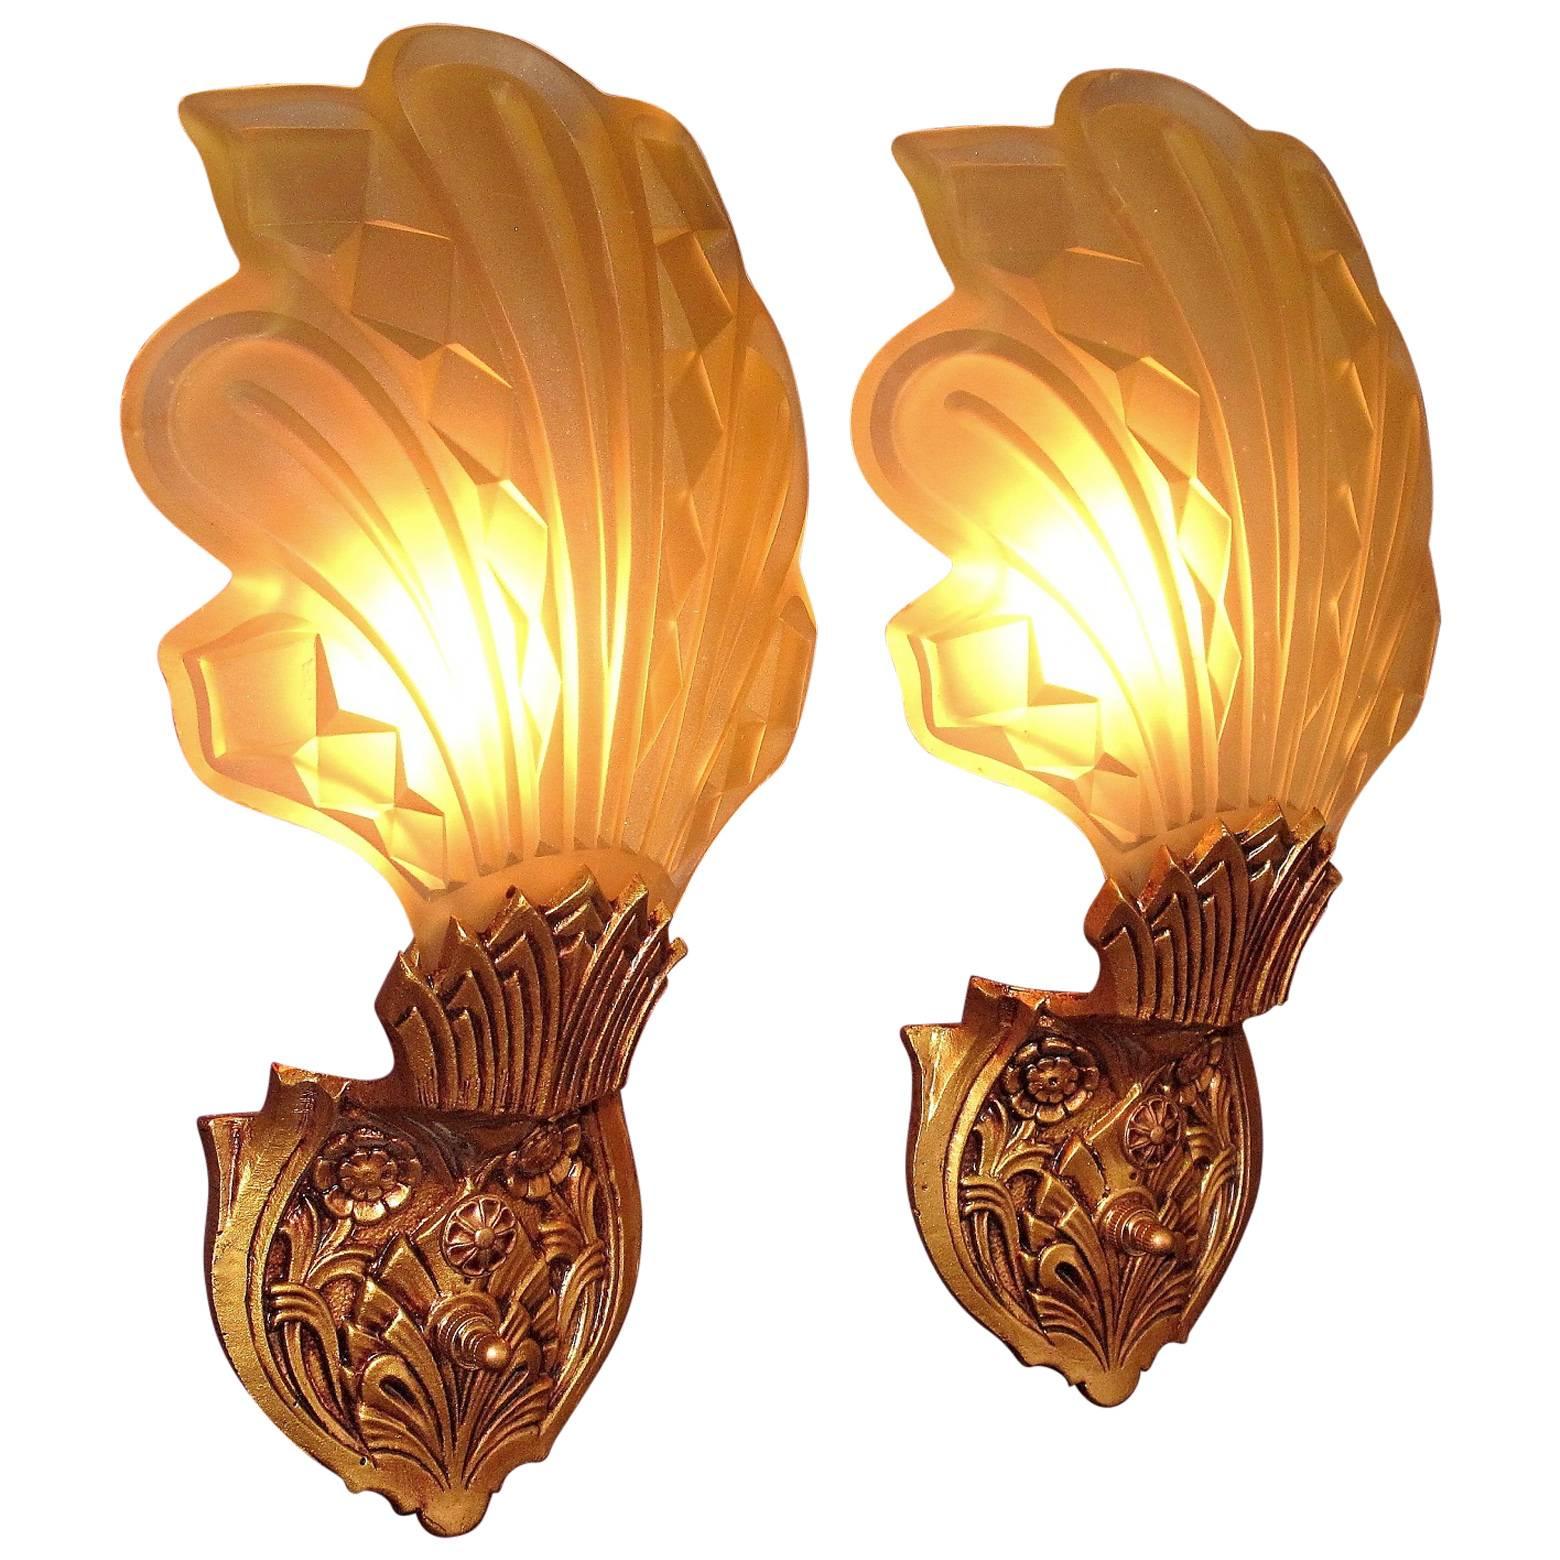 Late 1920s-Early 1930s Art Deco Wall Sconces